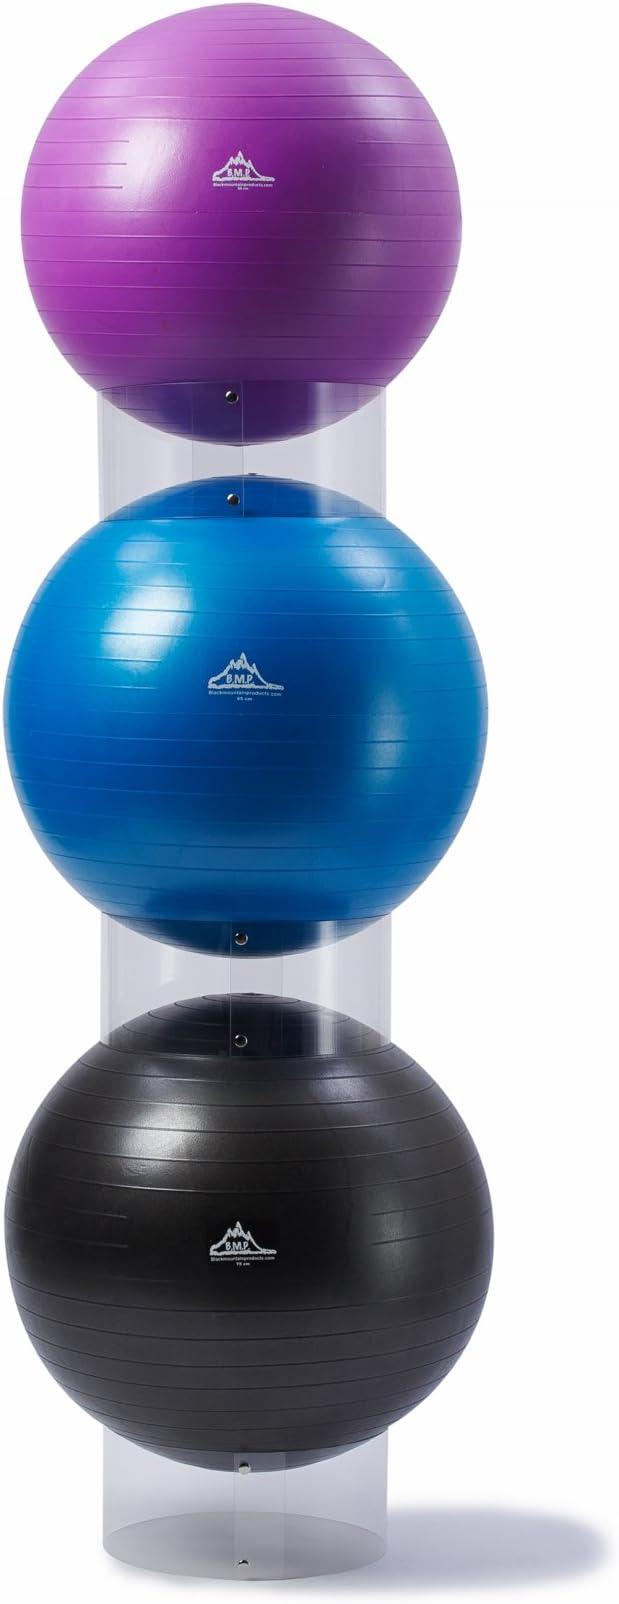 black mountain products bmp exercise stability ball display holder set of 3 black mountain products b0722651dm